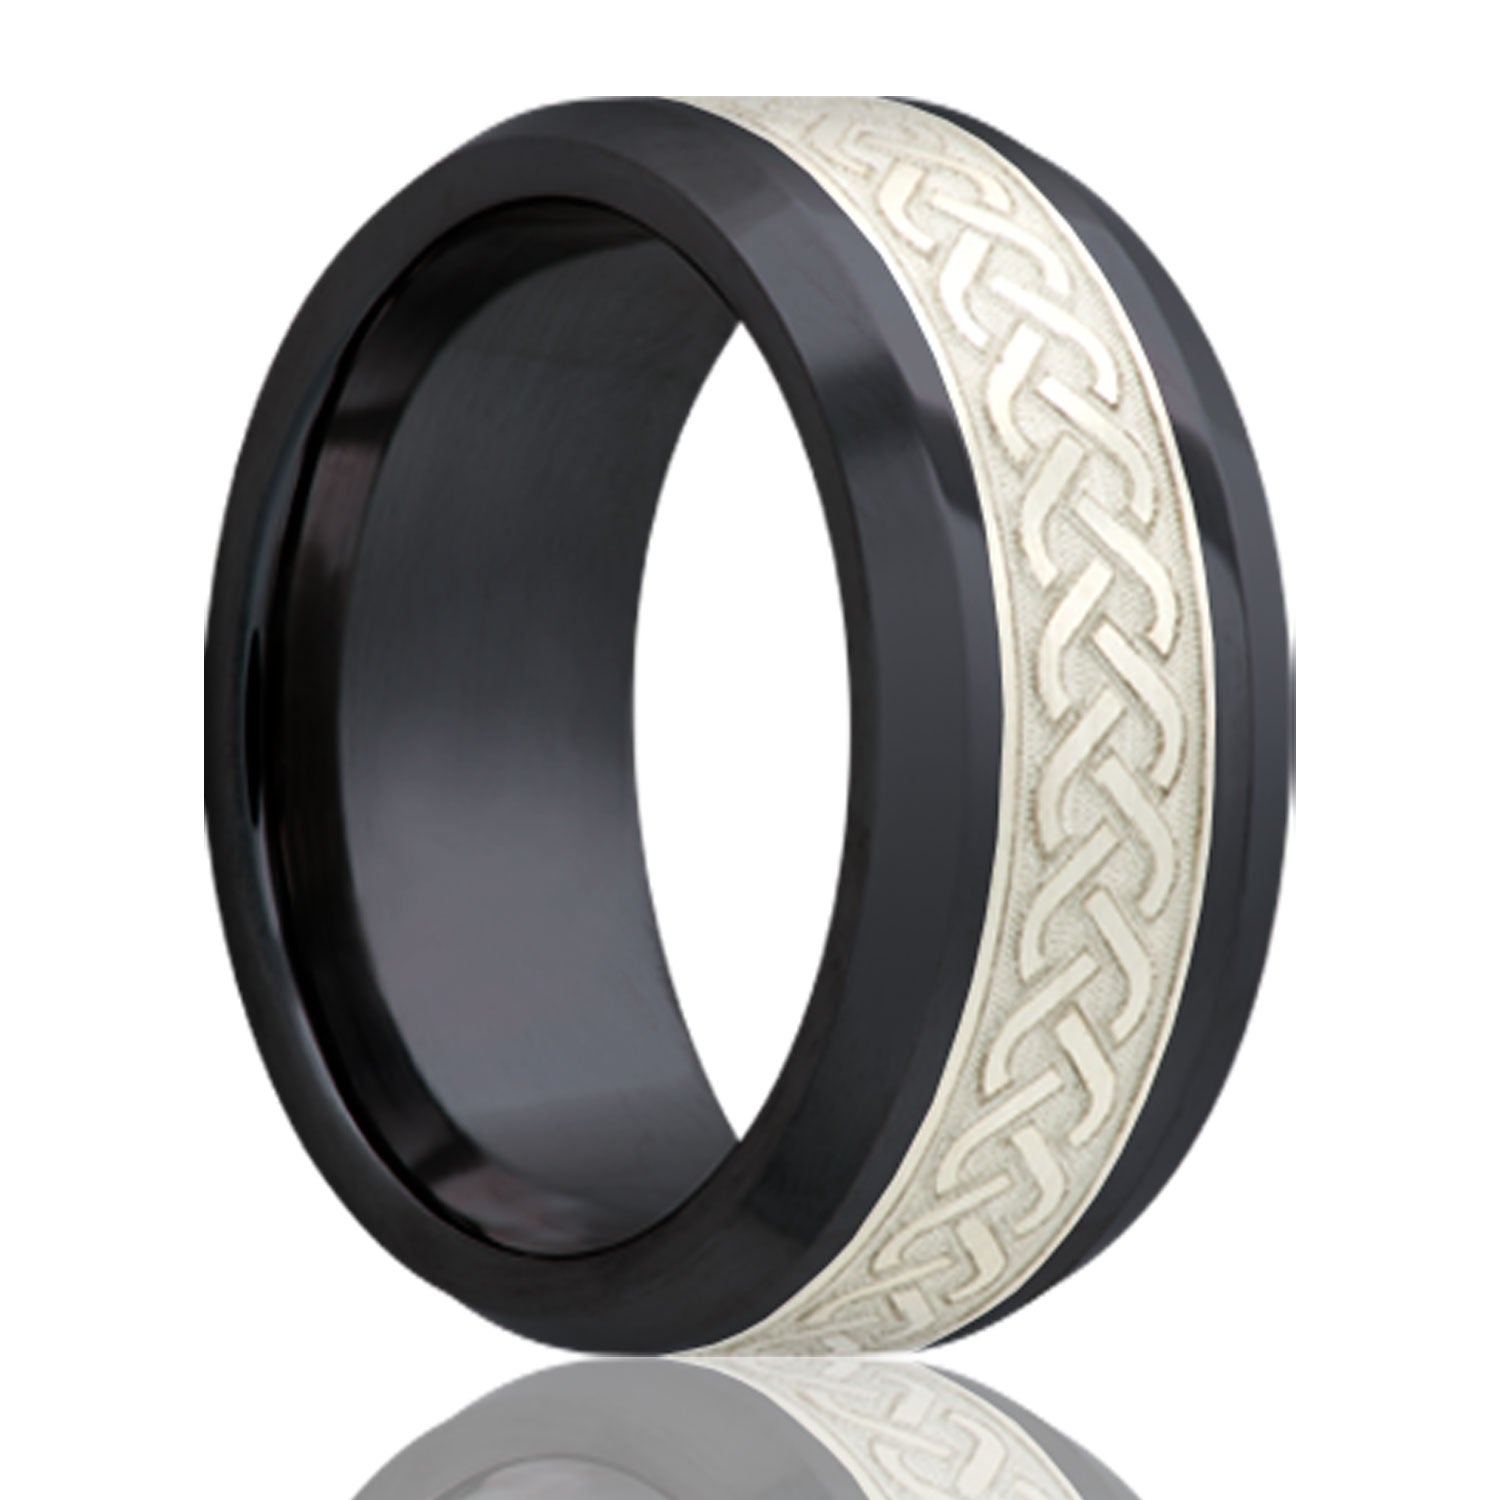 A celtic knot silver inlay zirconium wedding band with beveled edges displayed on a neutral white background.